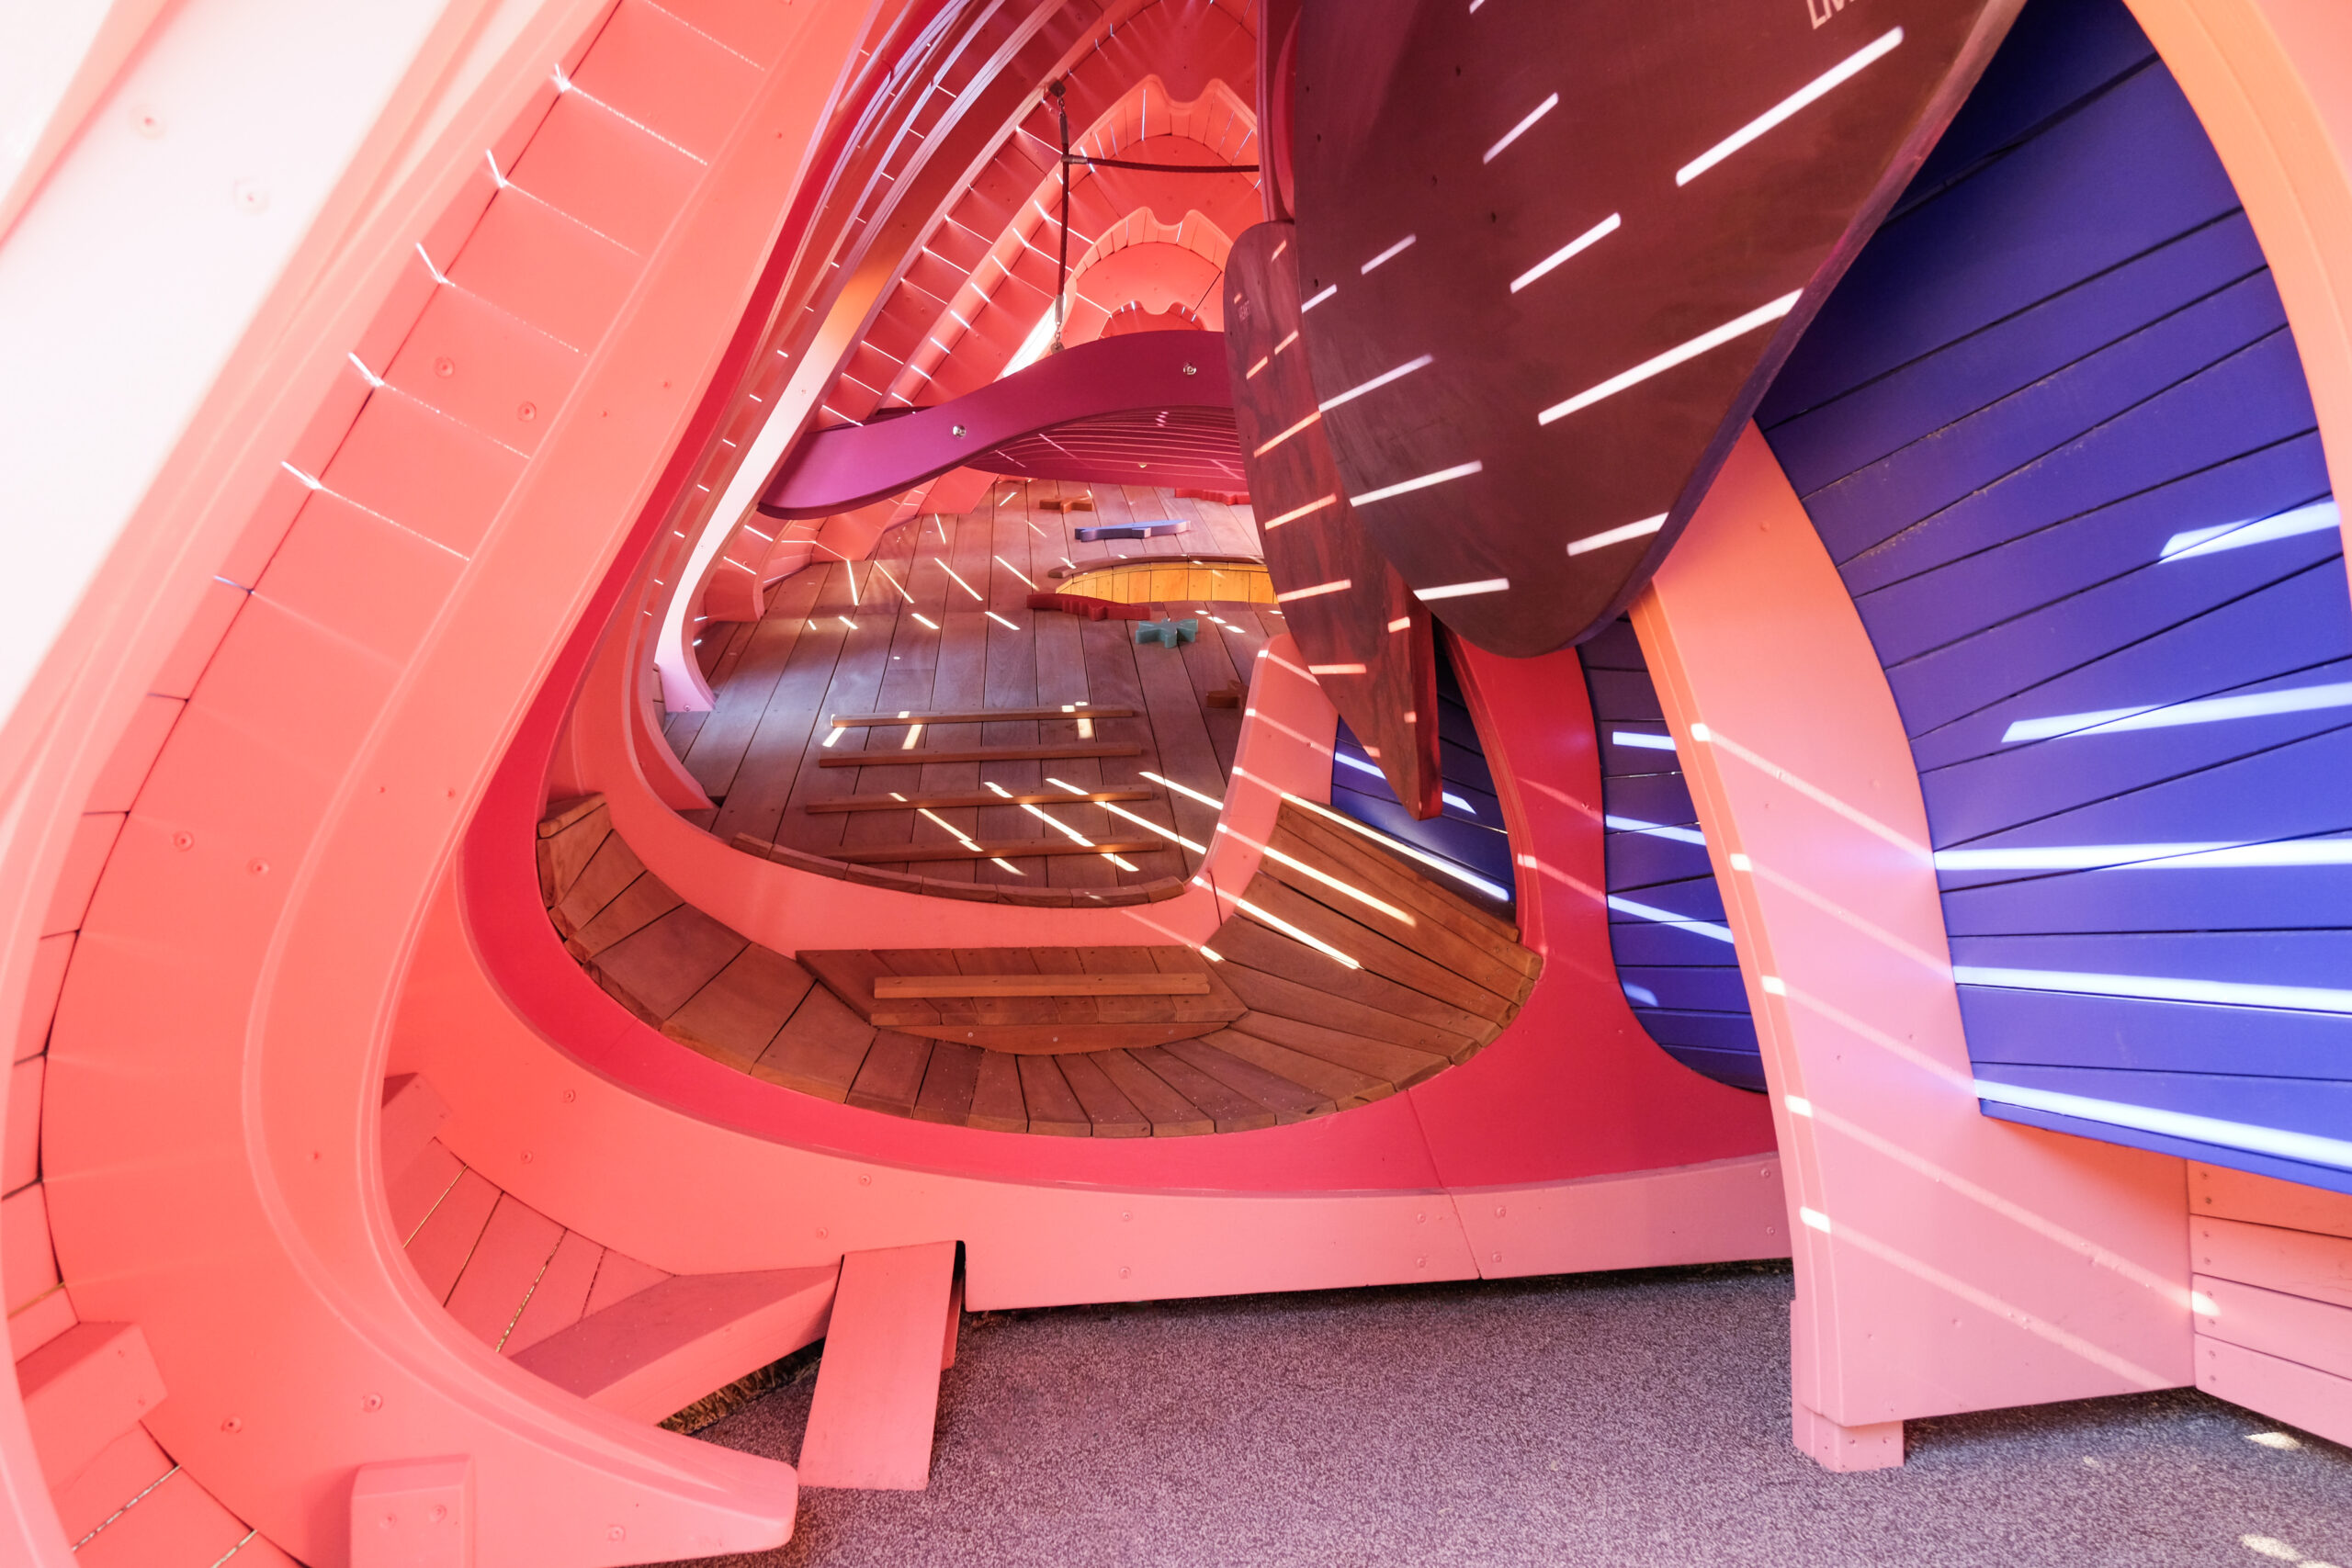 The interior of a Pier 26 Science Playground sturgeon with interactive obstacles inside